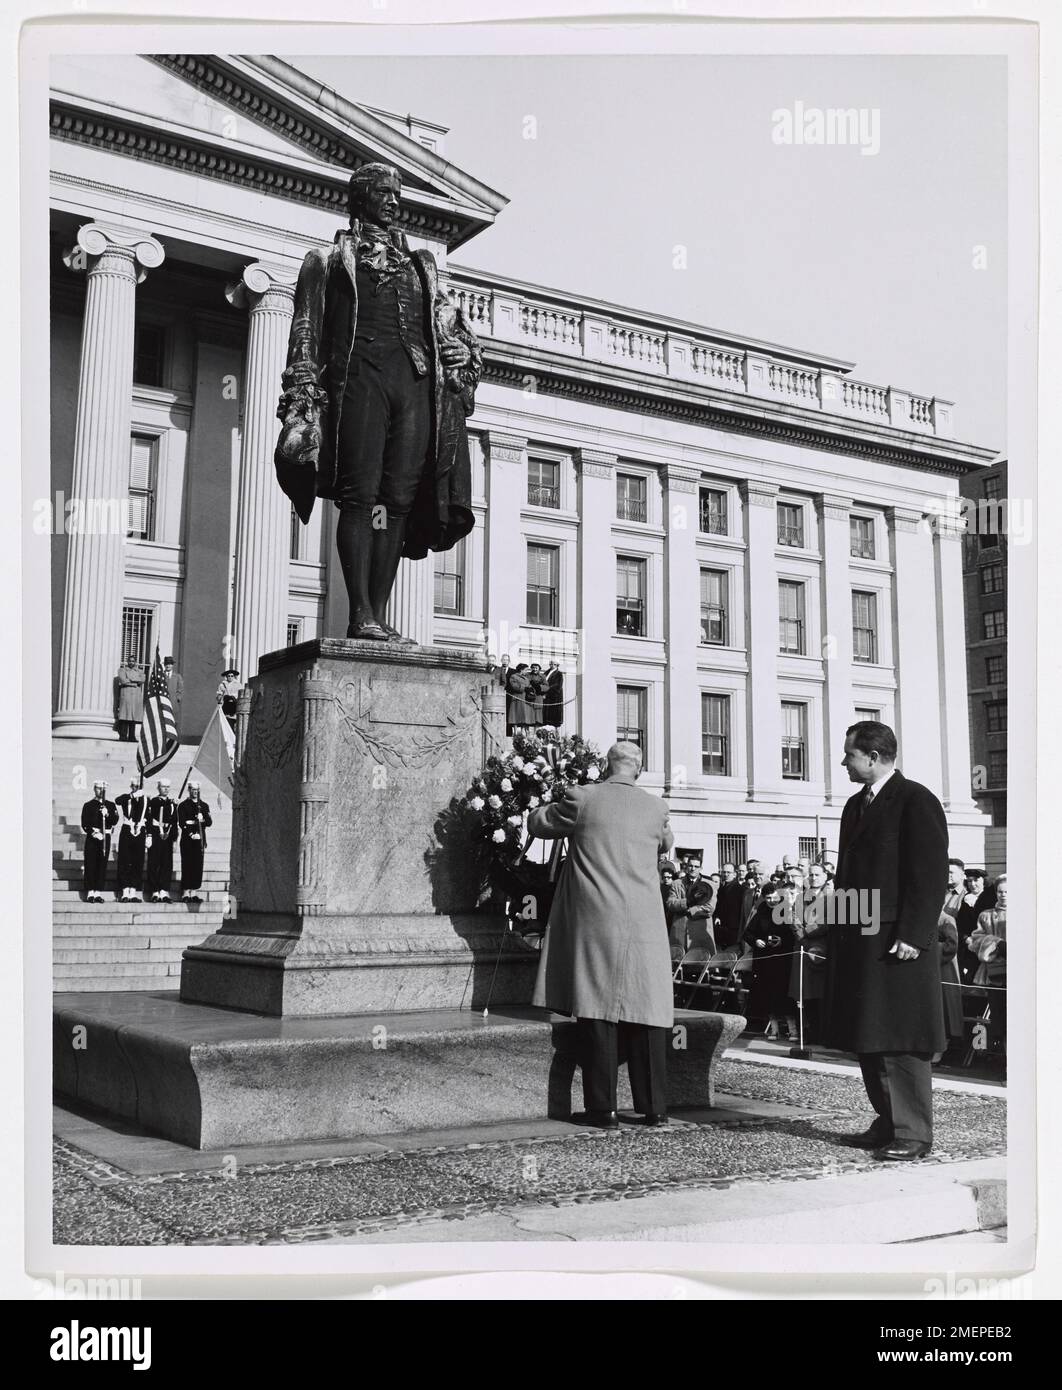 Opening Day of Alexander Hamilton Bicentennial in Washington, DC. Picture shows George M. Humphrey arranging wreath in front of Alexander Hamilton statue as Richard Nixon looks on. Stock Photo